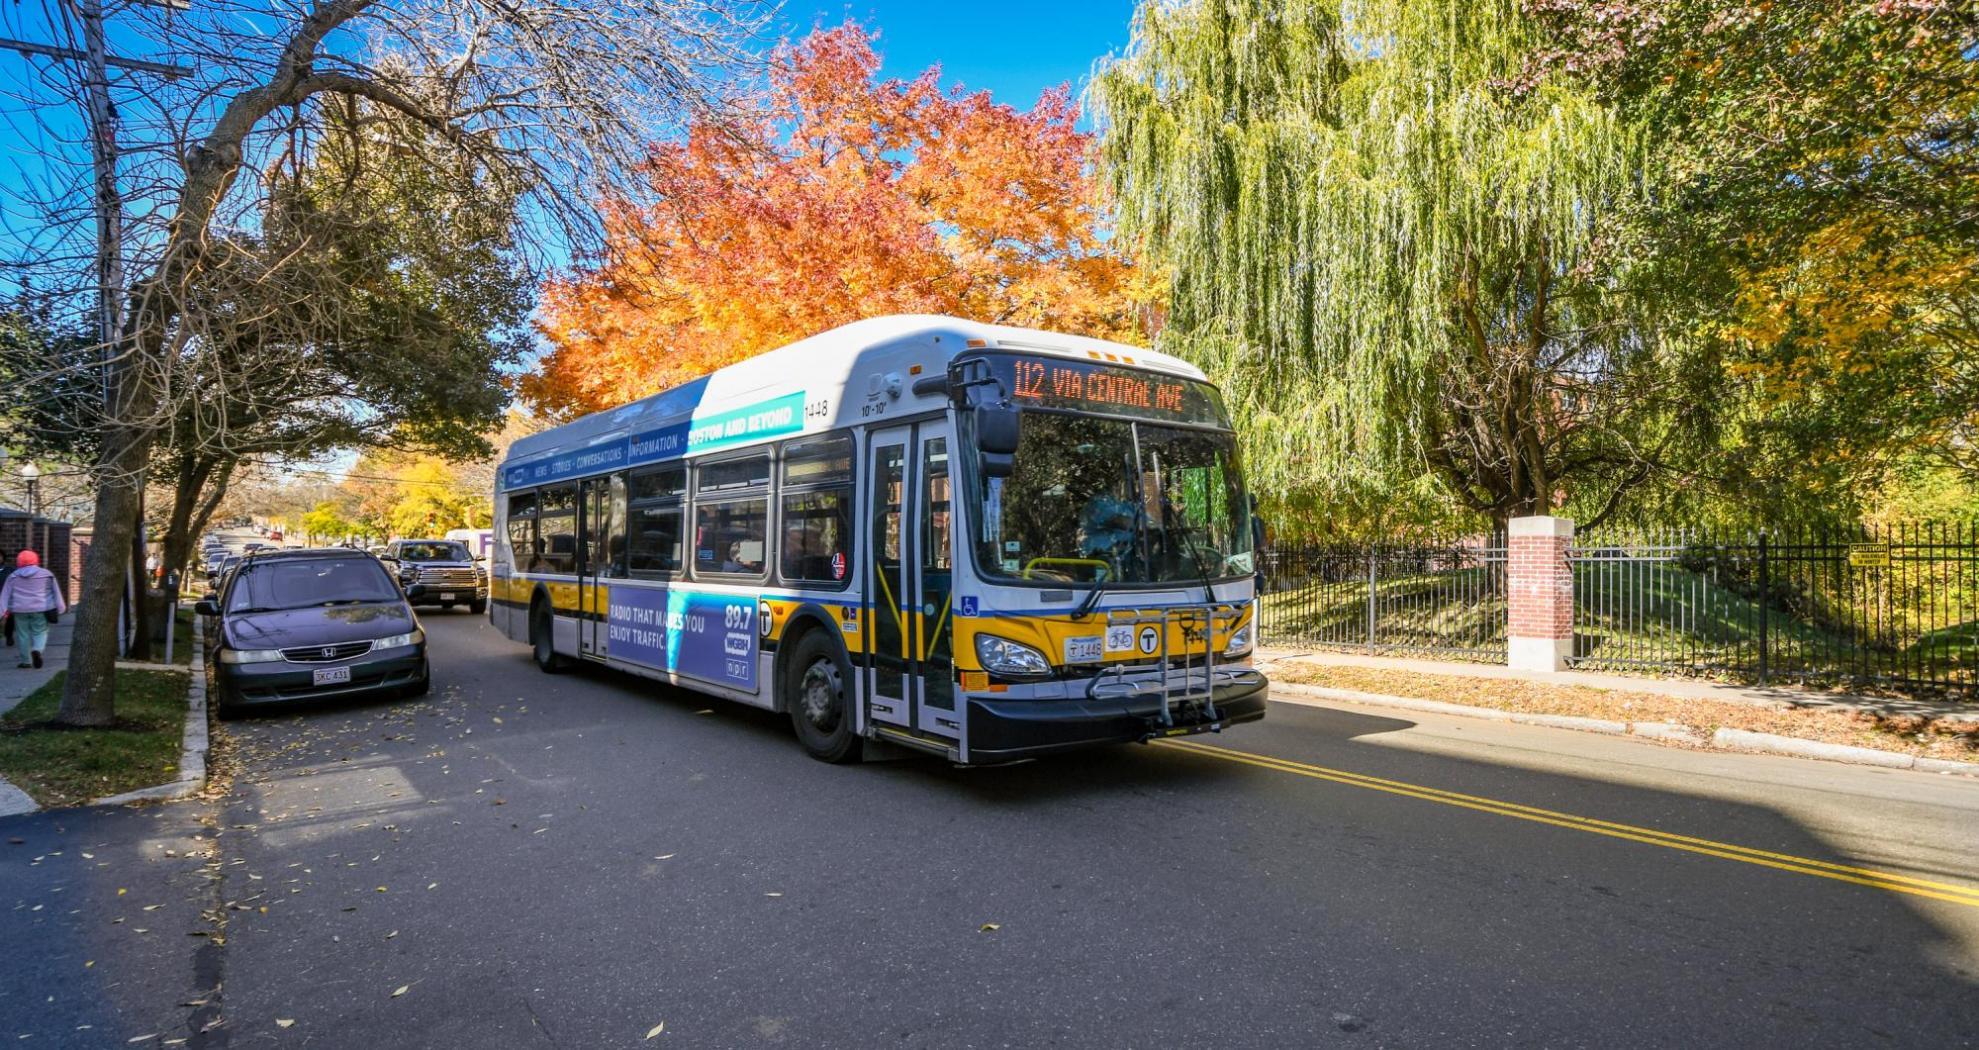 Route 112 bus with a headsign that says "Via Central Ave" travels through Chelsea, with fall foliage in the background